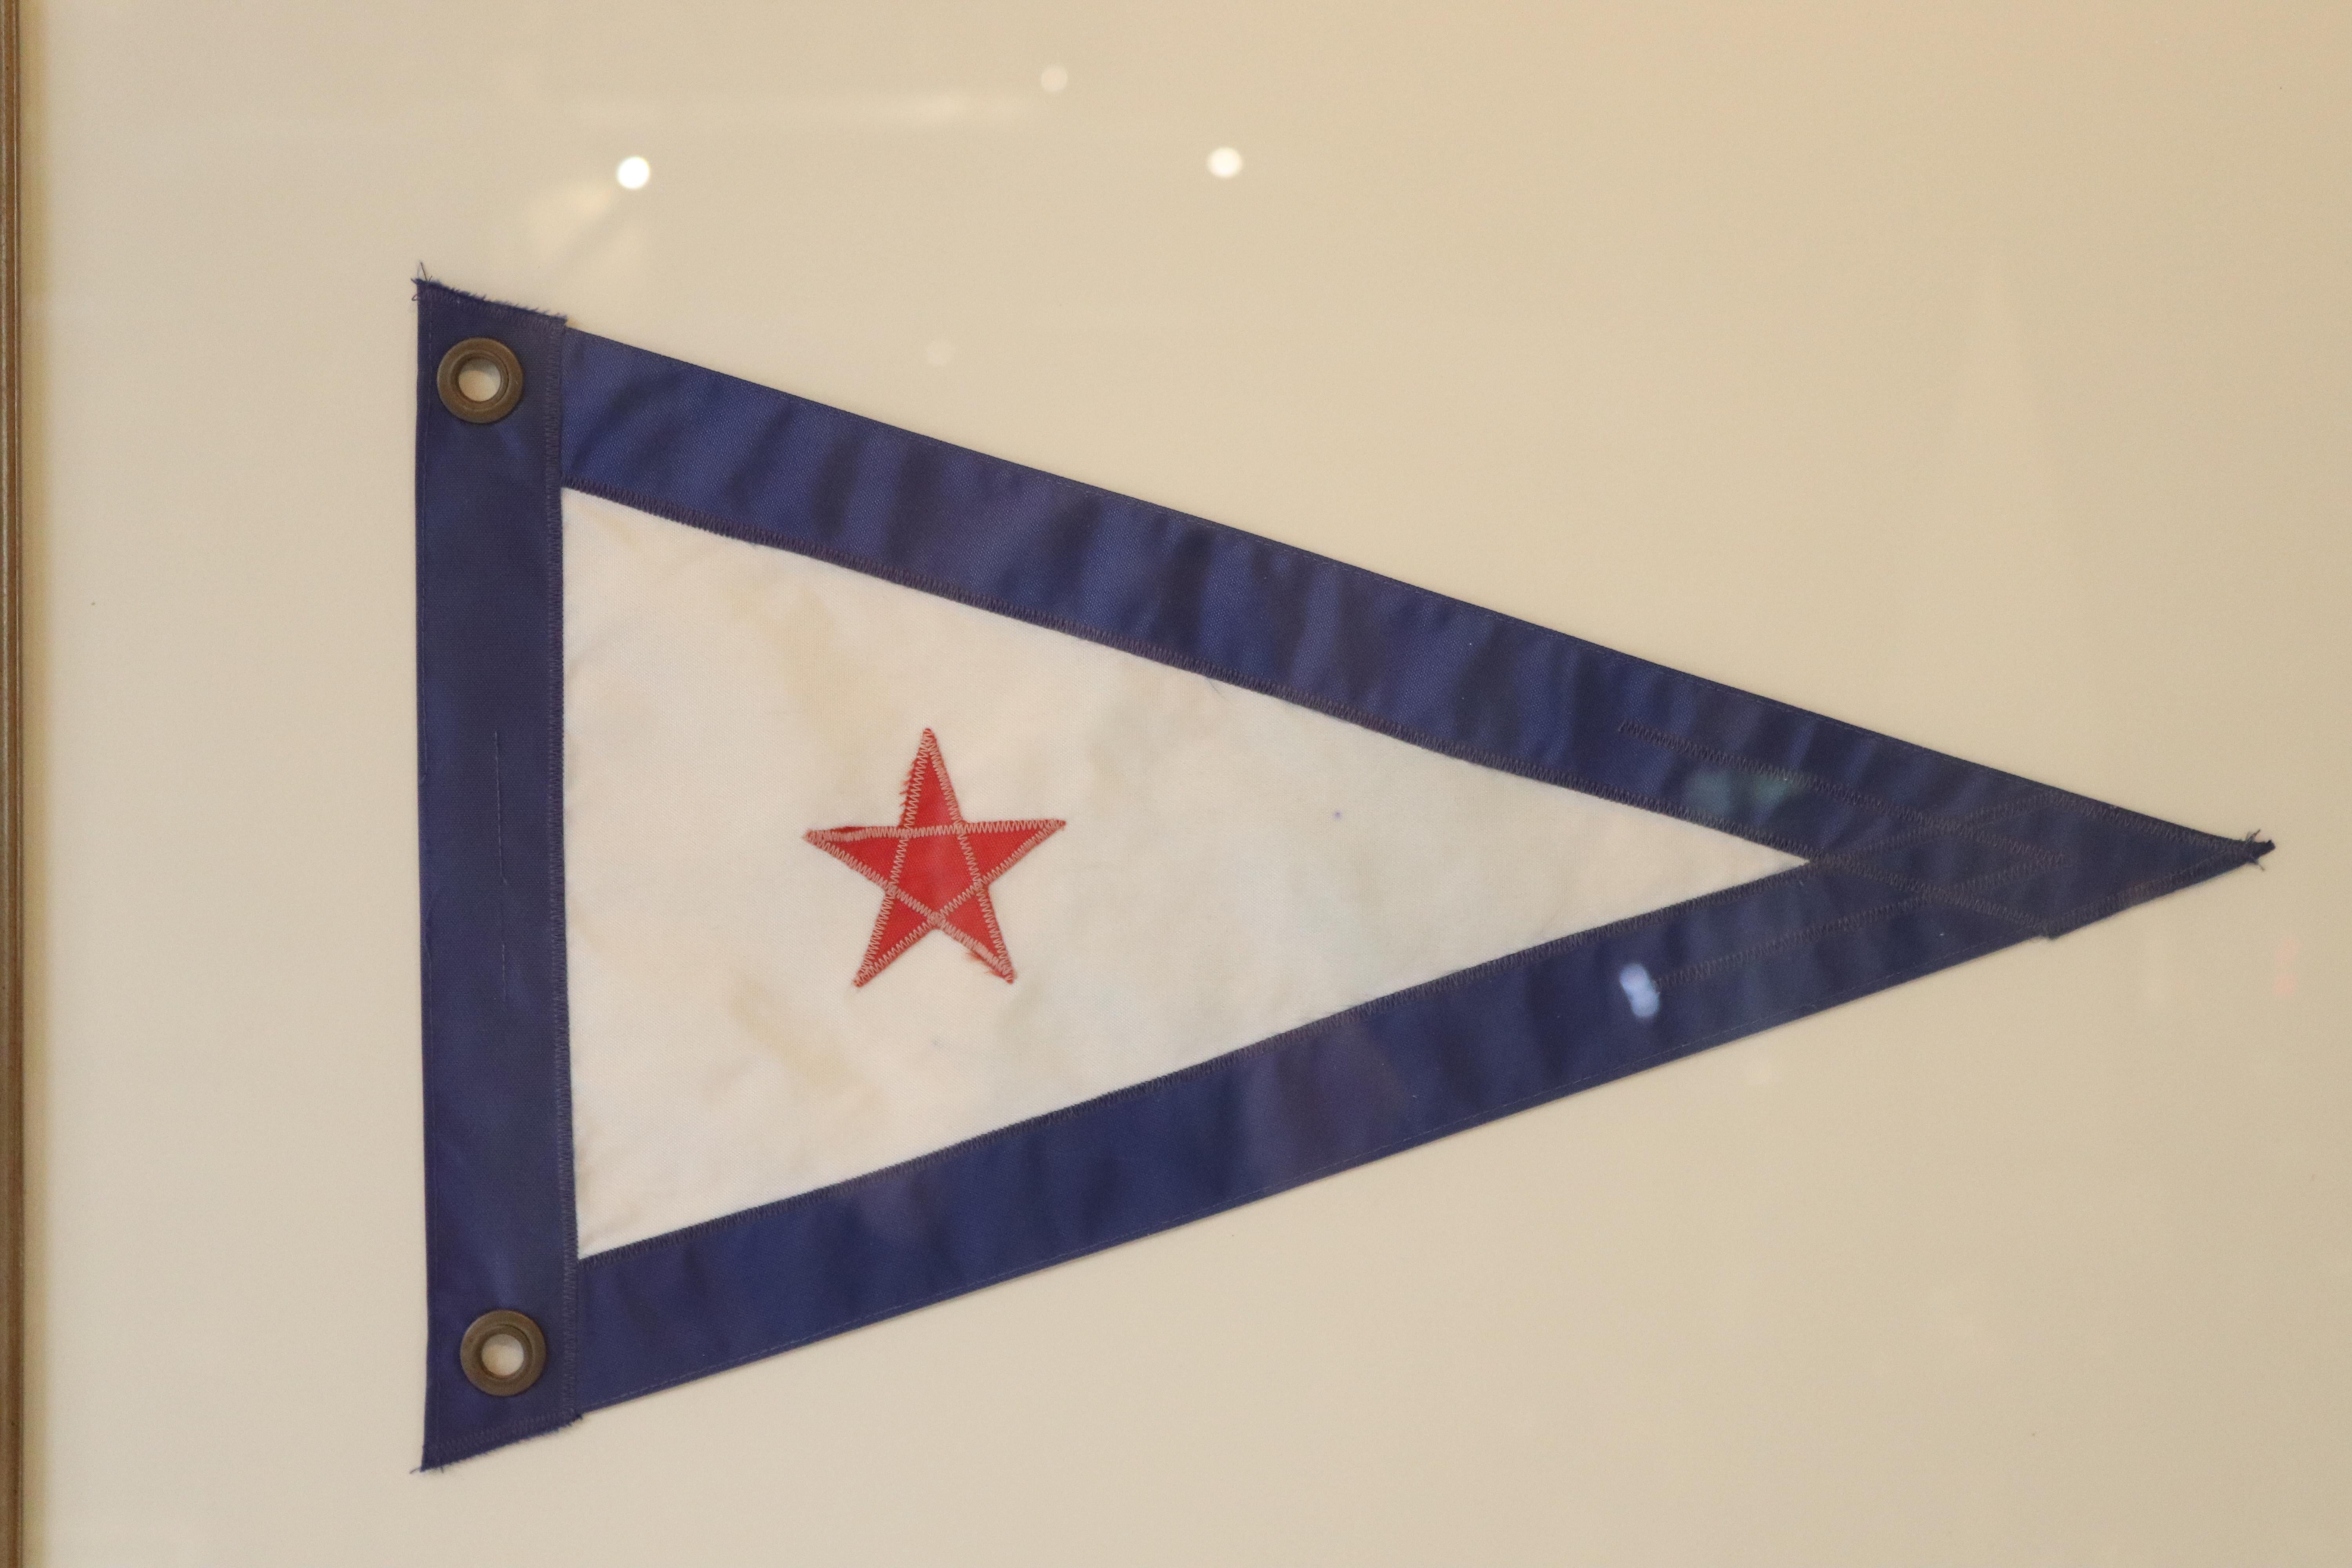 Nautical flag from the San Diego Yacht club. Red star on a white field with blue border. matted and framed. Measures: 24